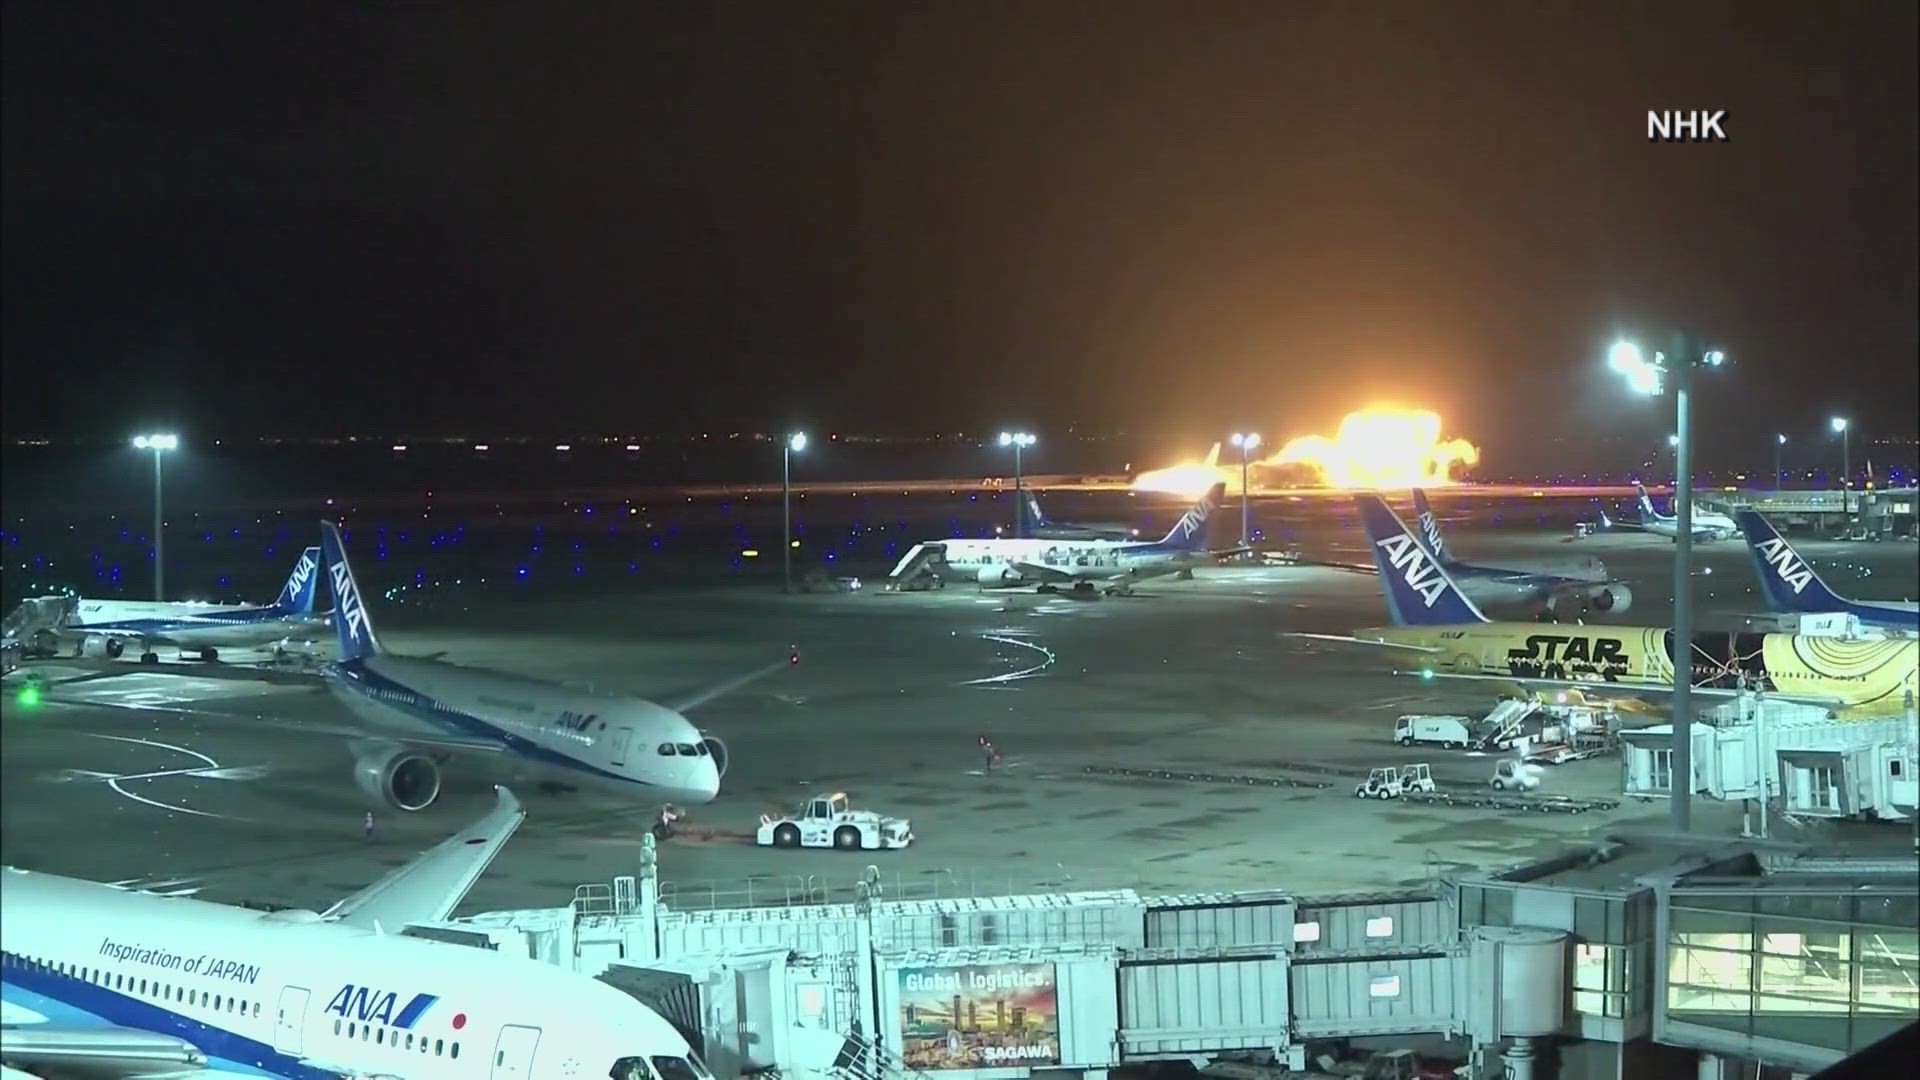 It happened at one of the country's busiest airports in Tokyo. The pilot on the coast guard plane survived but the other five crew members did not.